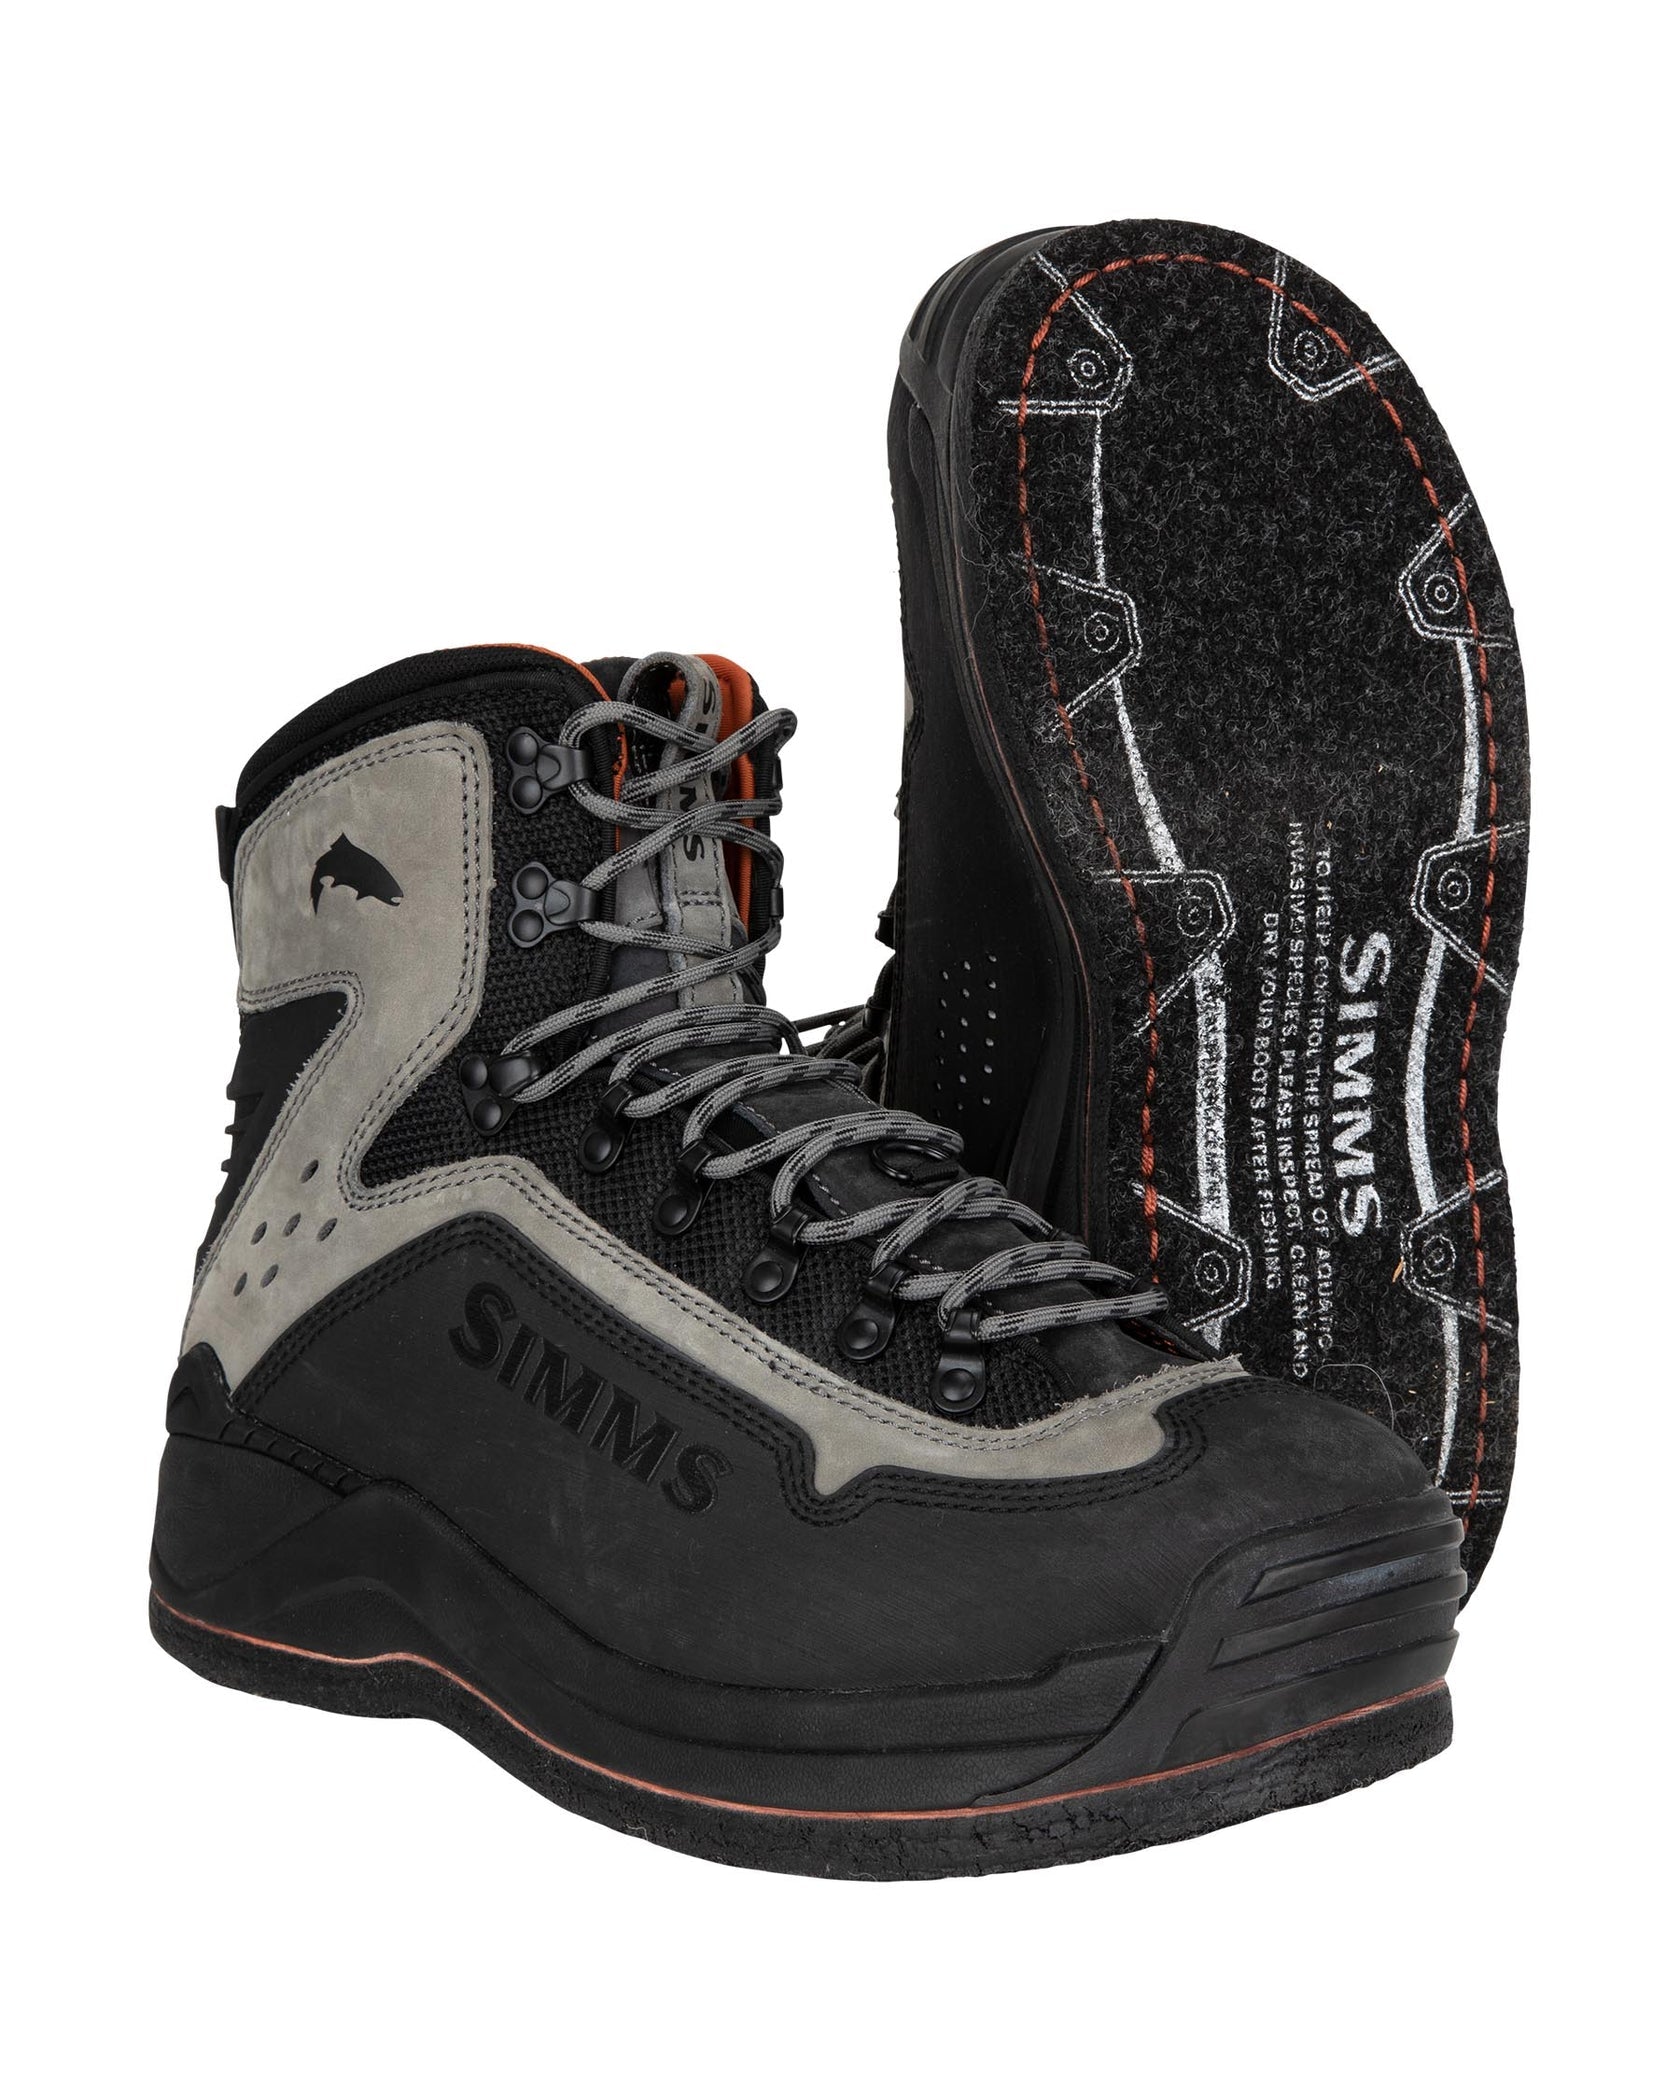 SIMMS G3 GUIDE FELT SOLE WADING BOOT